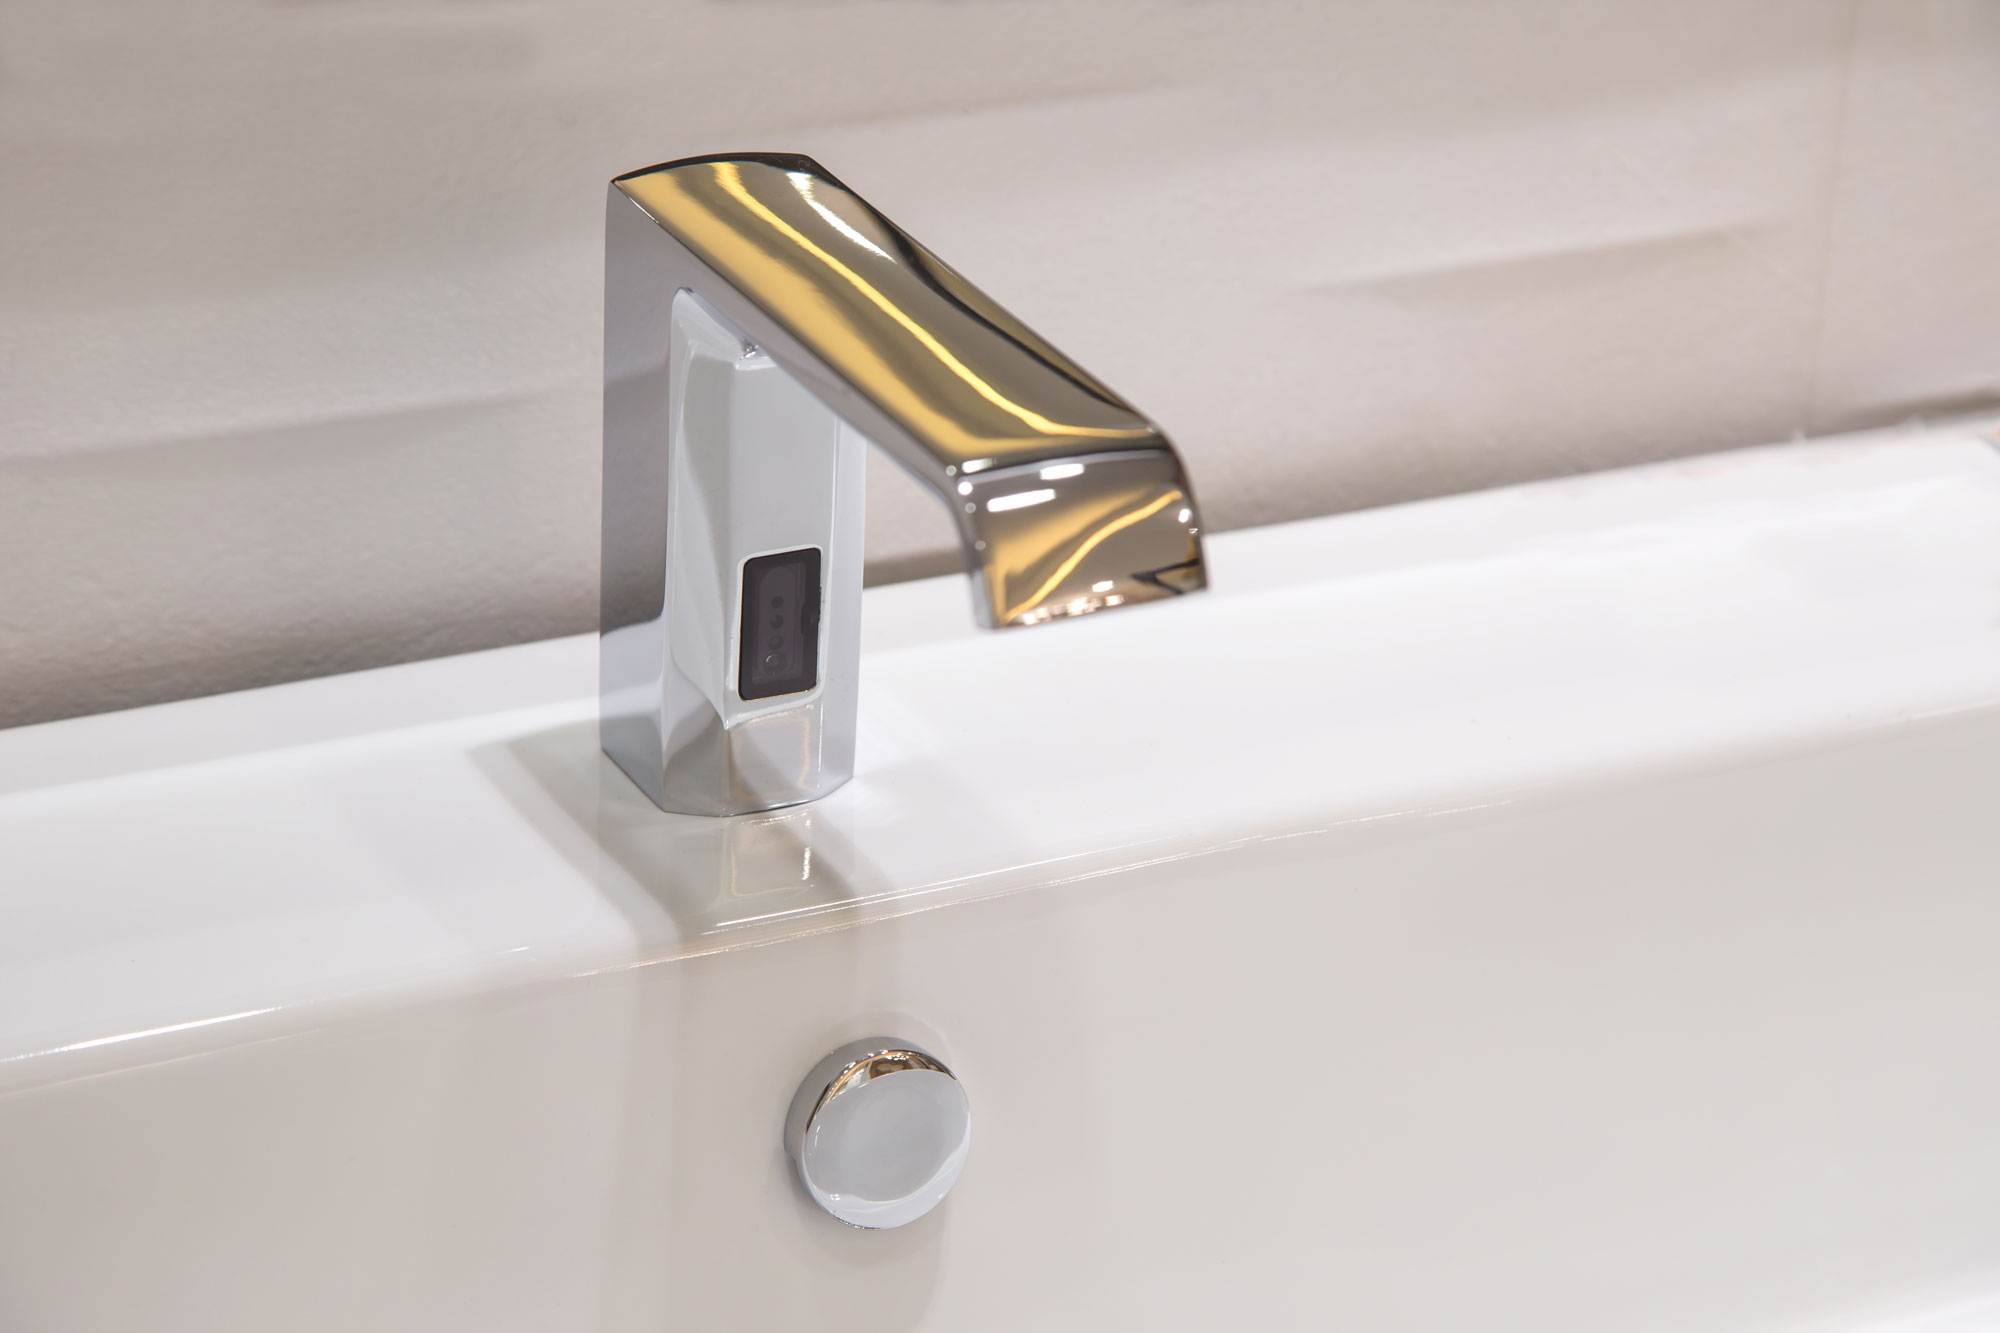 A touchless smart faucet inside a luxury bathroom